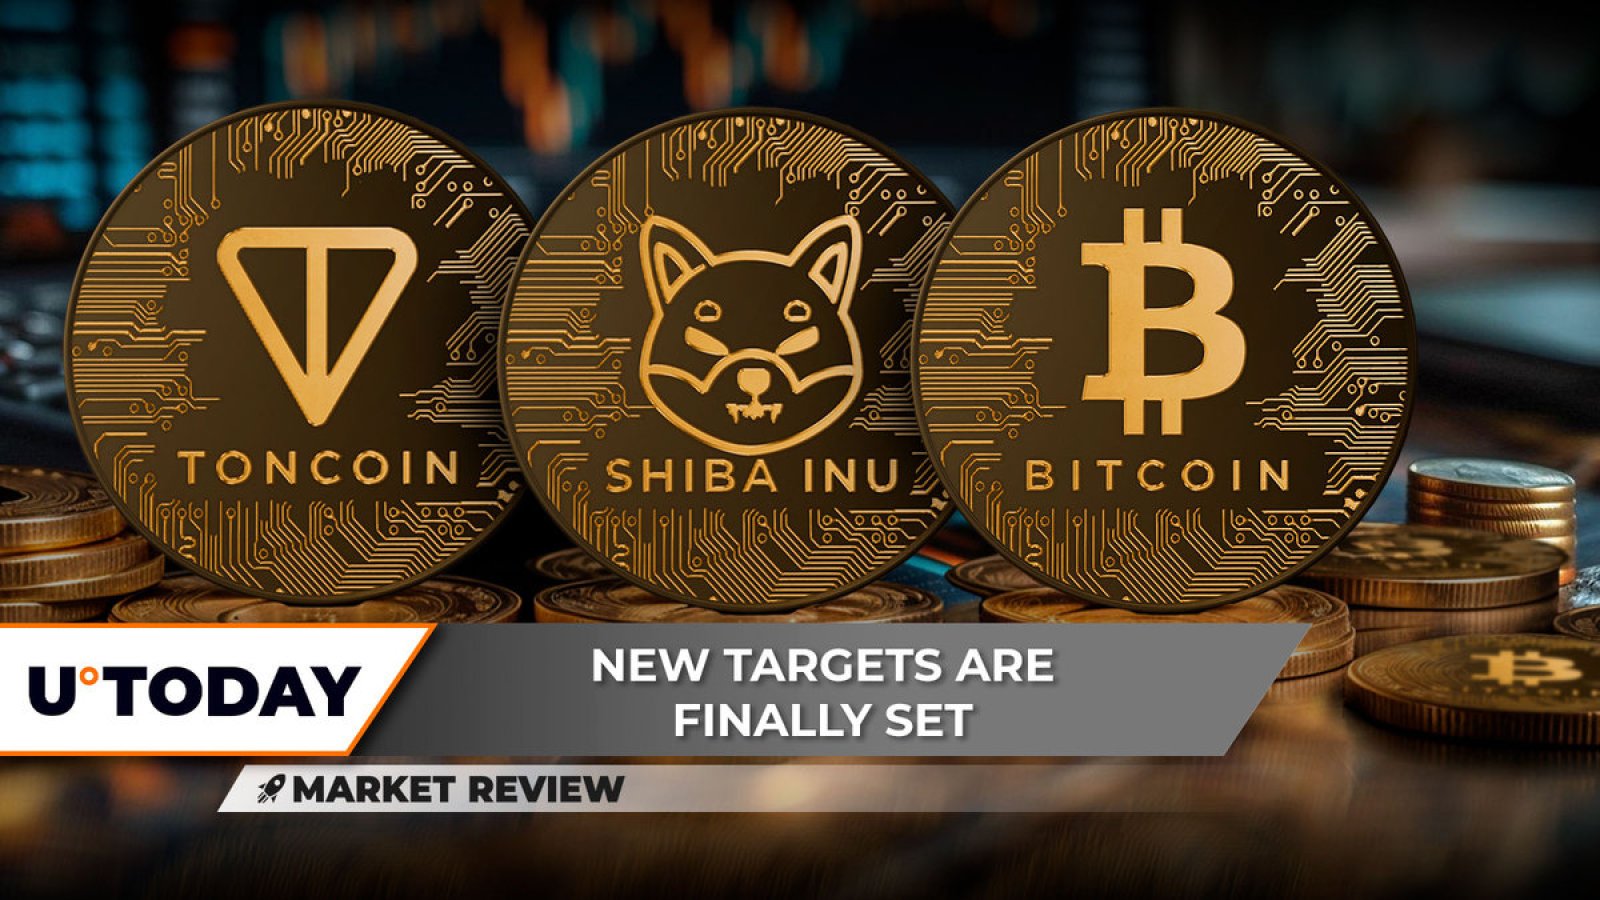 Toncoin (TON) to Hit $8 If This Happens, Shiba Inu (SHIB) Is Anemic: Is It Good or Bad Thing? Bitcoin (BTC) at Pivotal Moment Reaching $63,000